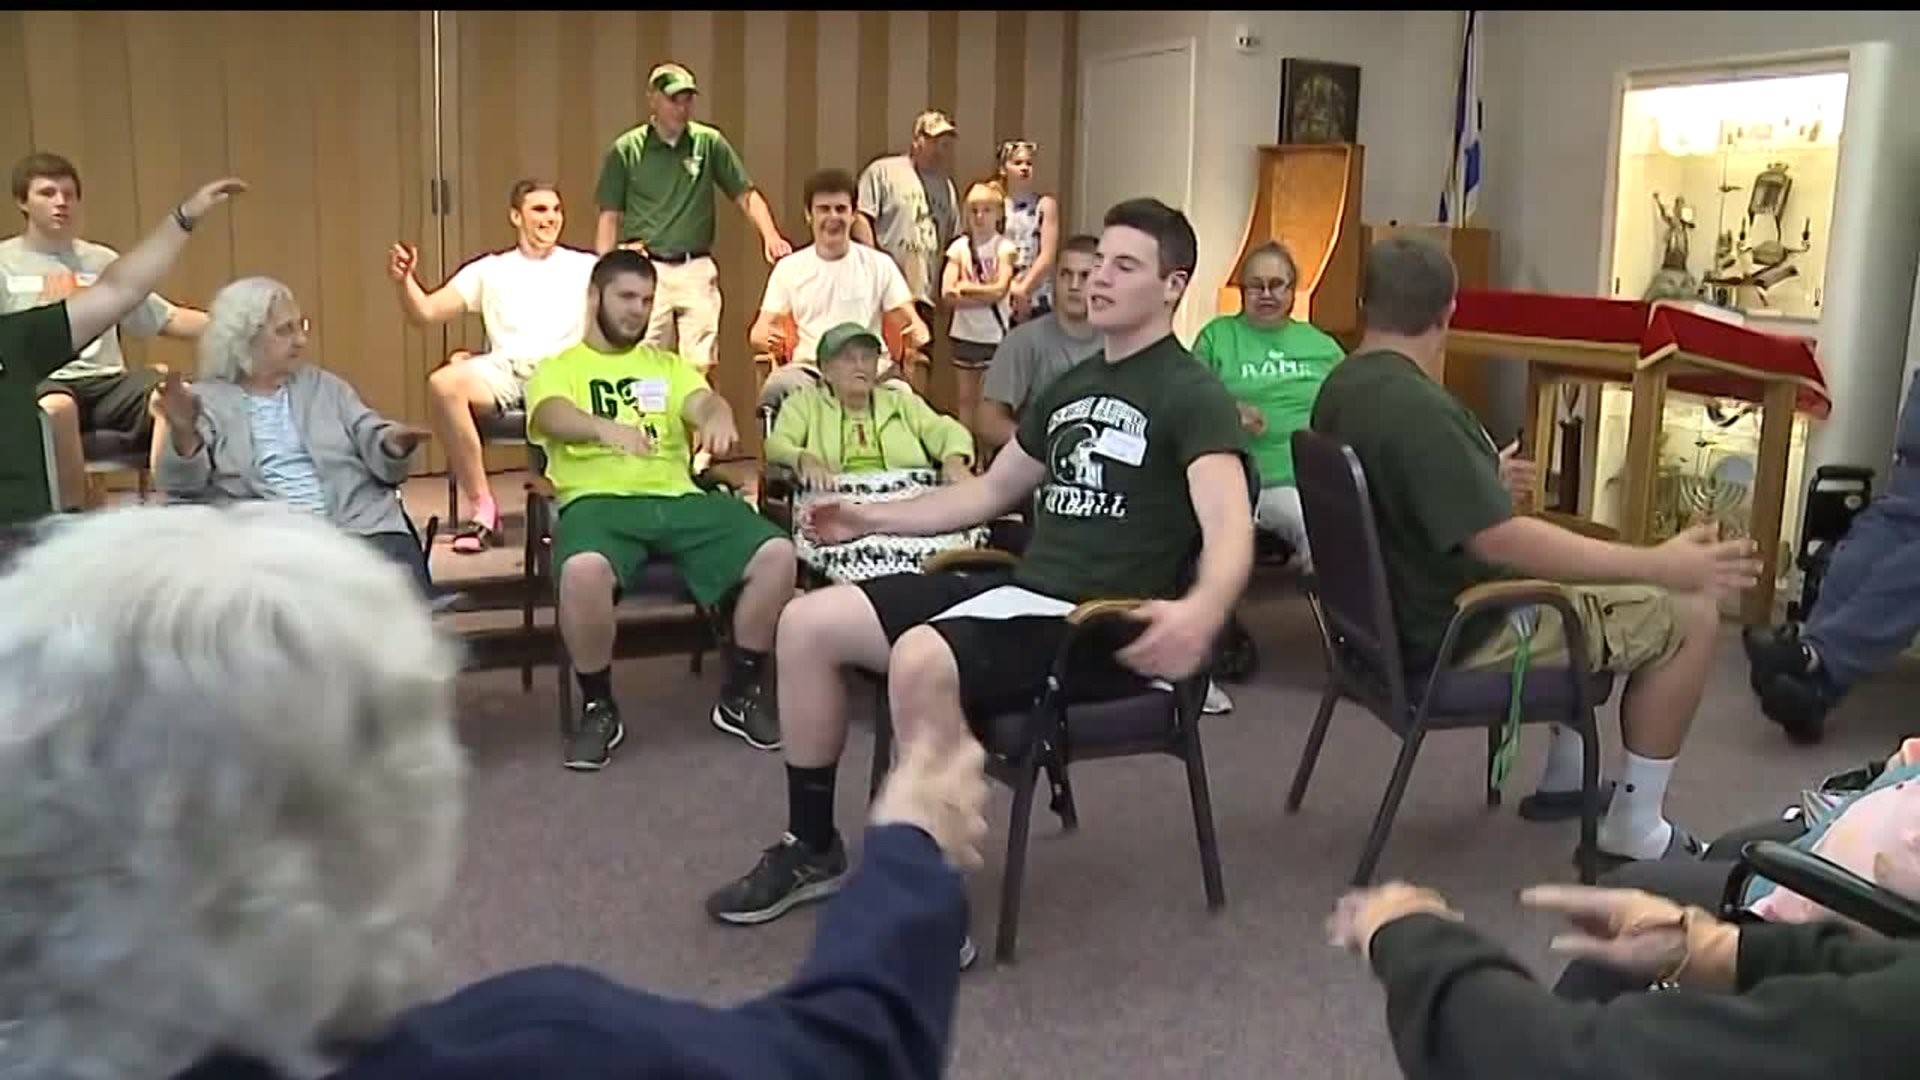 Central Dauphin football players give back 10,000 hours of community service